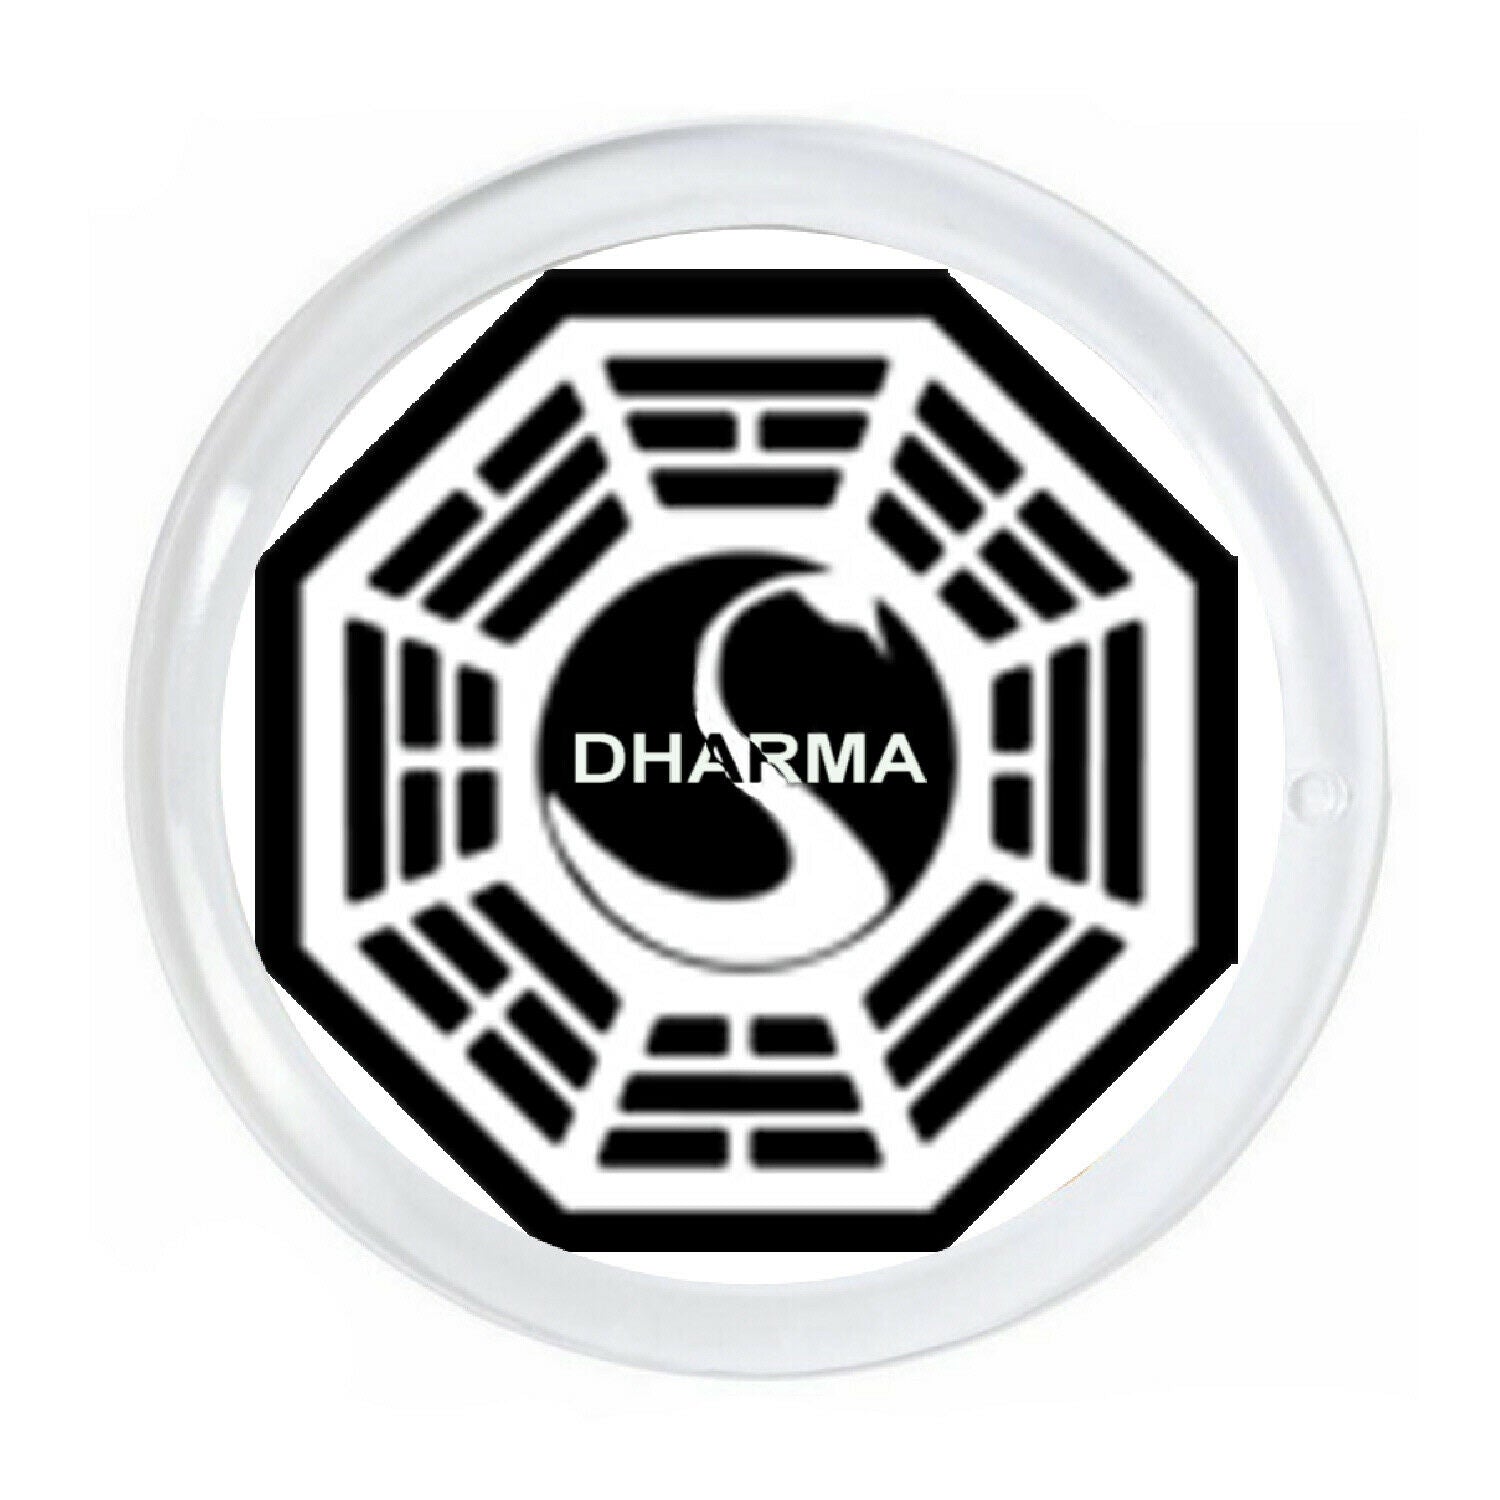 Dharma Station LOST TV Show Magnet big round almost 3 inch diameter with border.